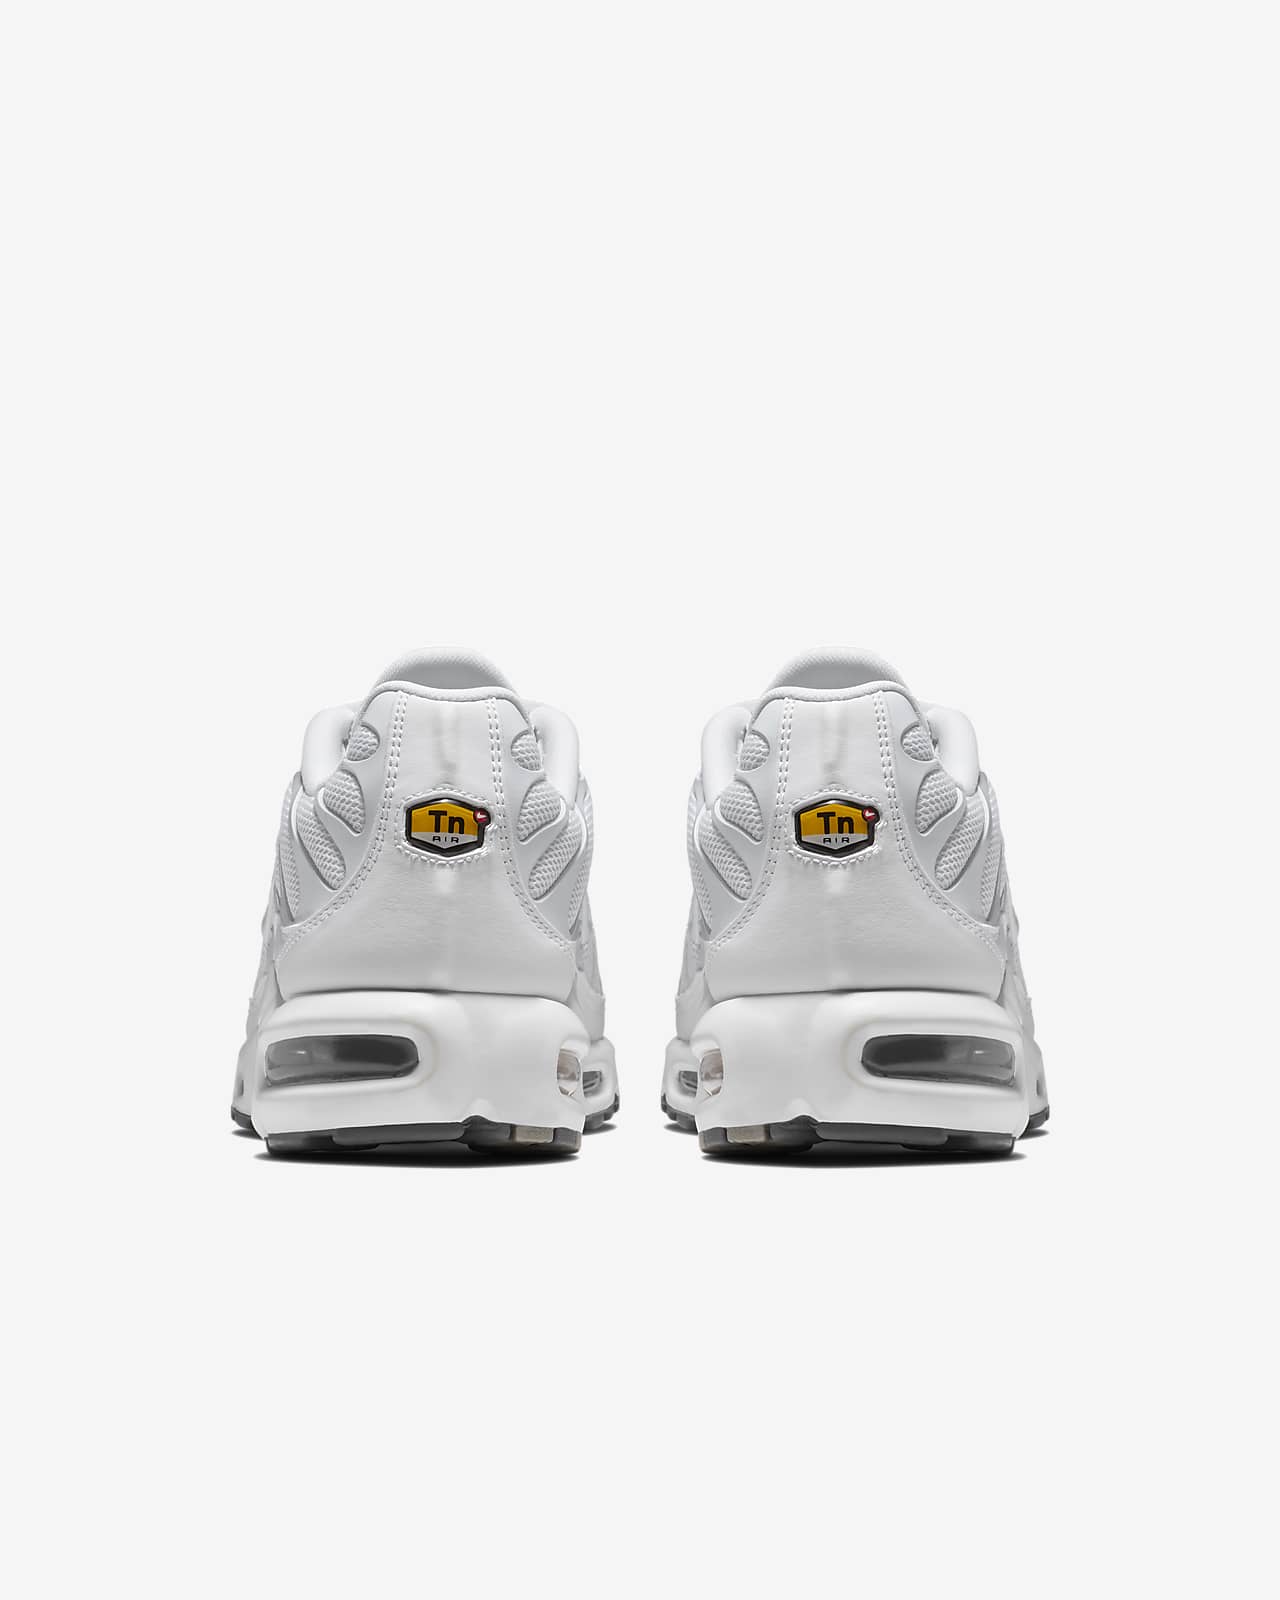 Go out ugly Flavor Nike Air Max Plus Men's Shoes. Nike.com